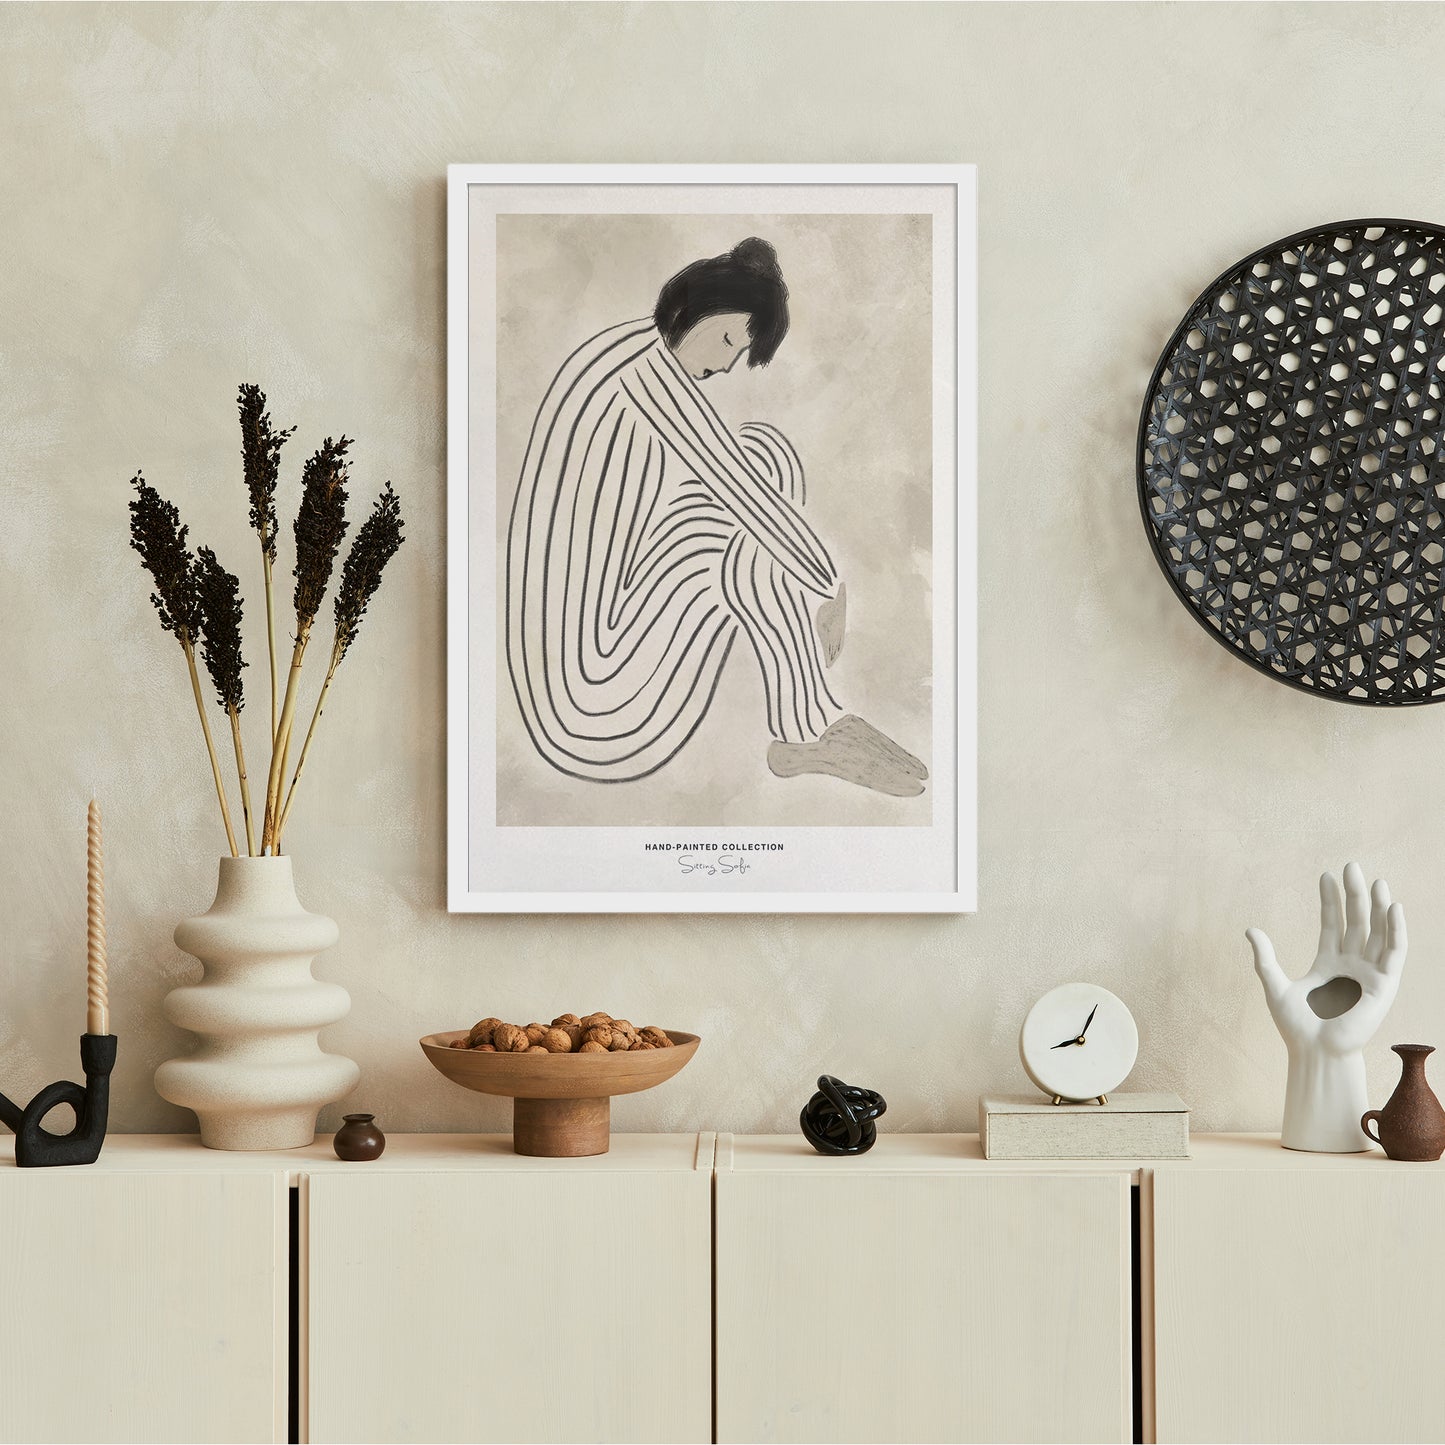 Sitting Sofia | Hand-Painted Collection Poster